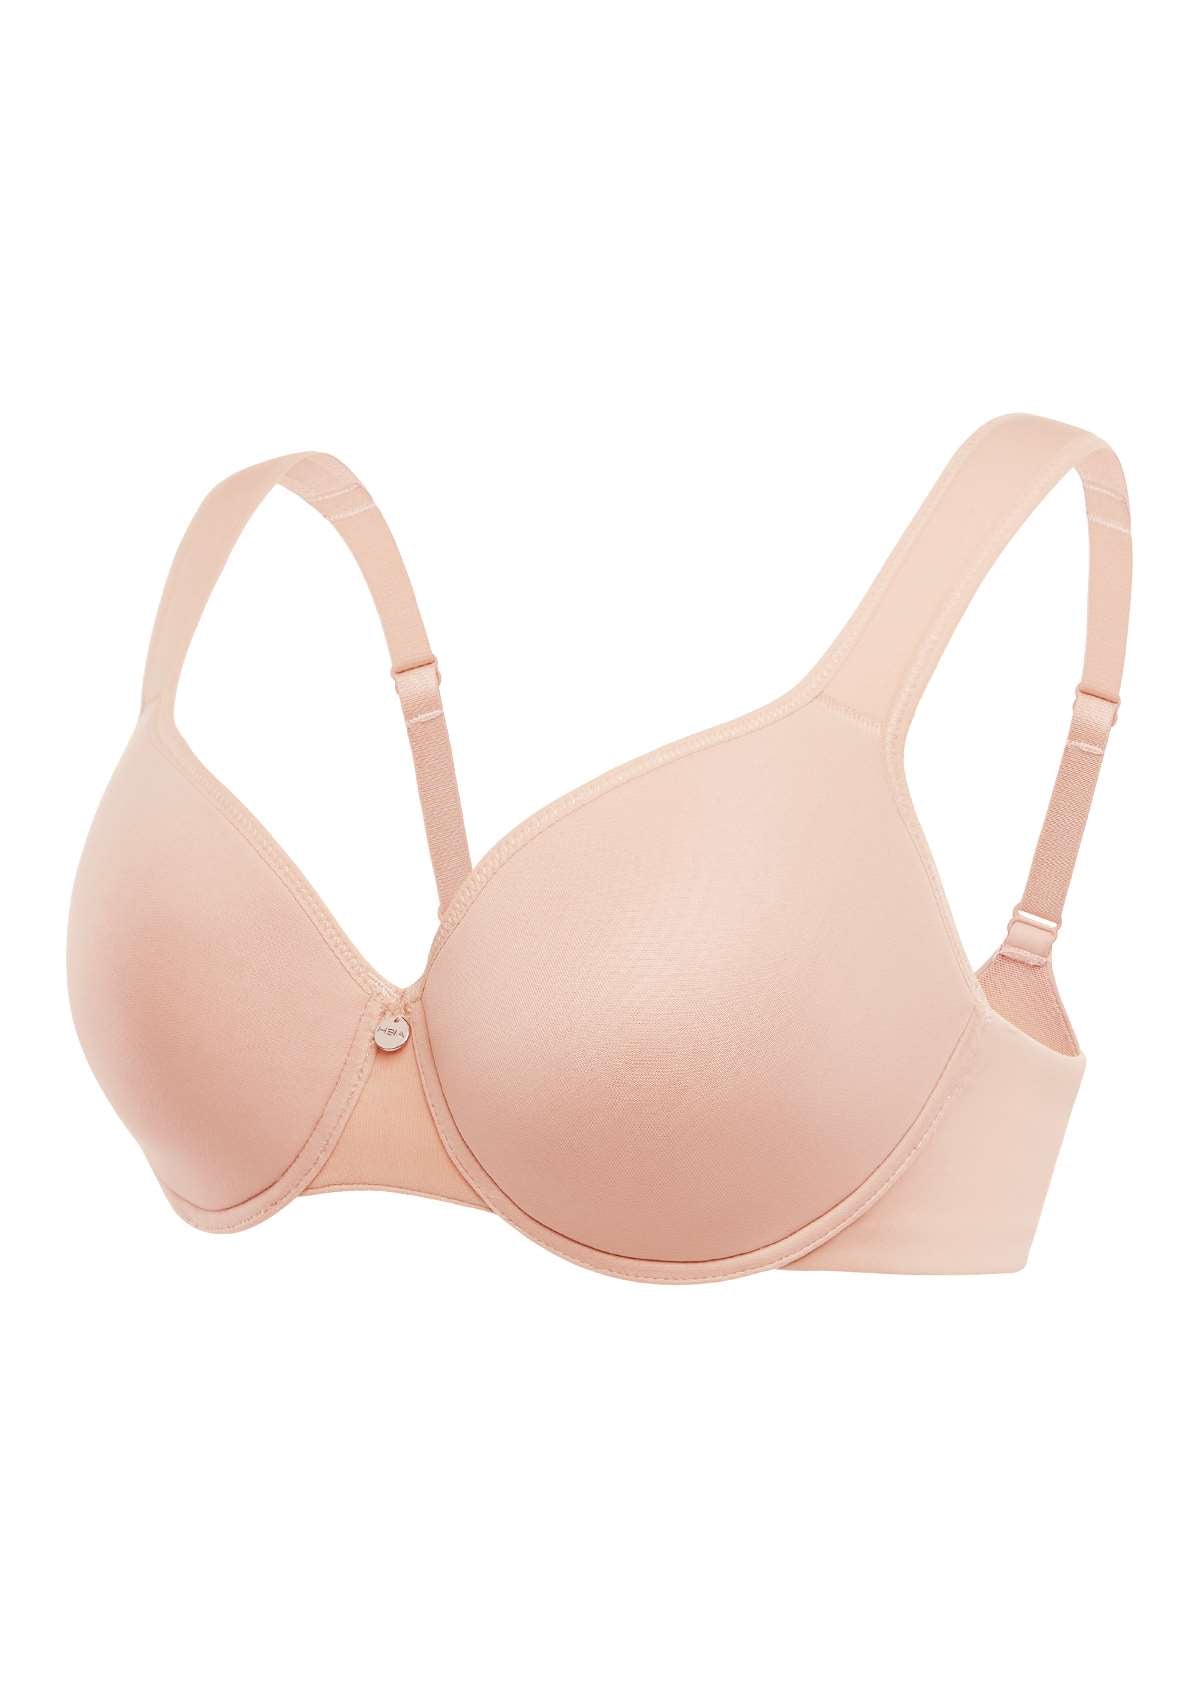 HSIA Patricia Smooth Classic T-shirt Lightly Padded Minimizer Bra - Light Pink / 42 / H